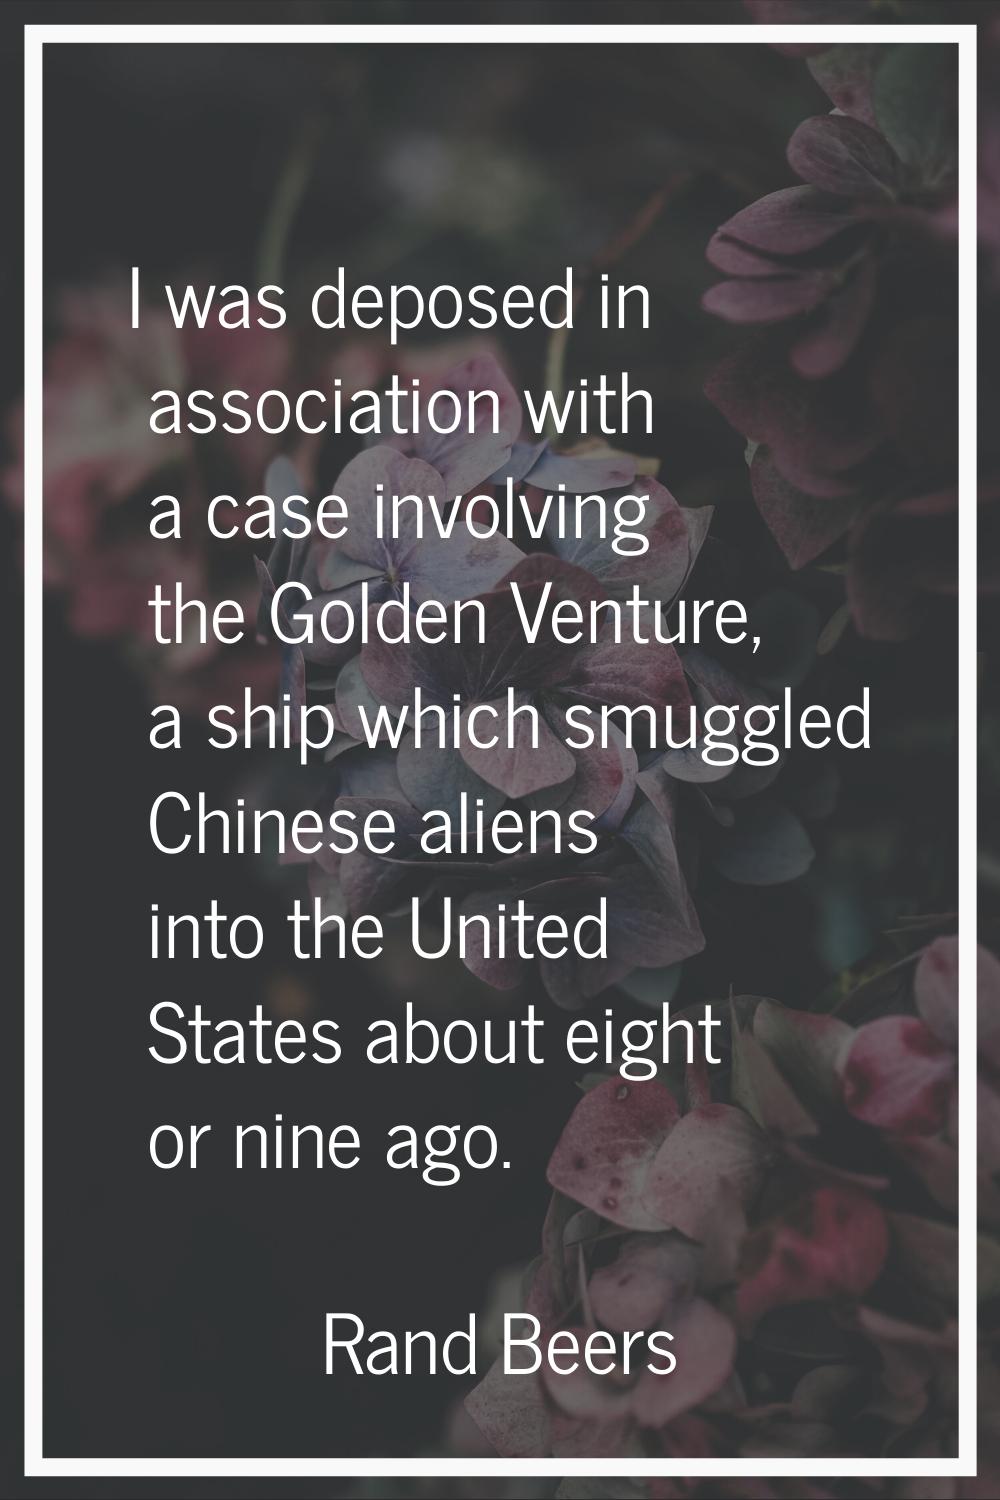 I was deposed in association with a case involving the Golden Venture, a ship which smuggled Chines